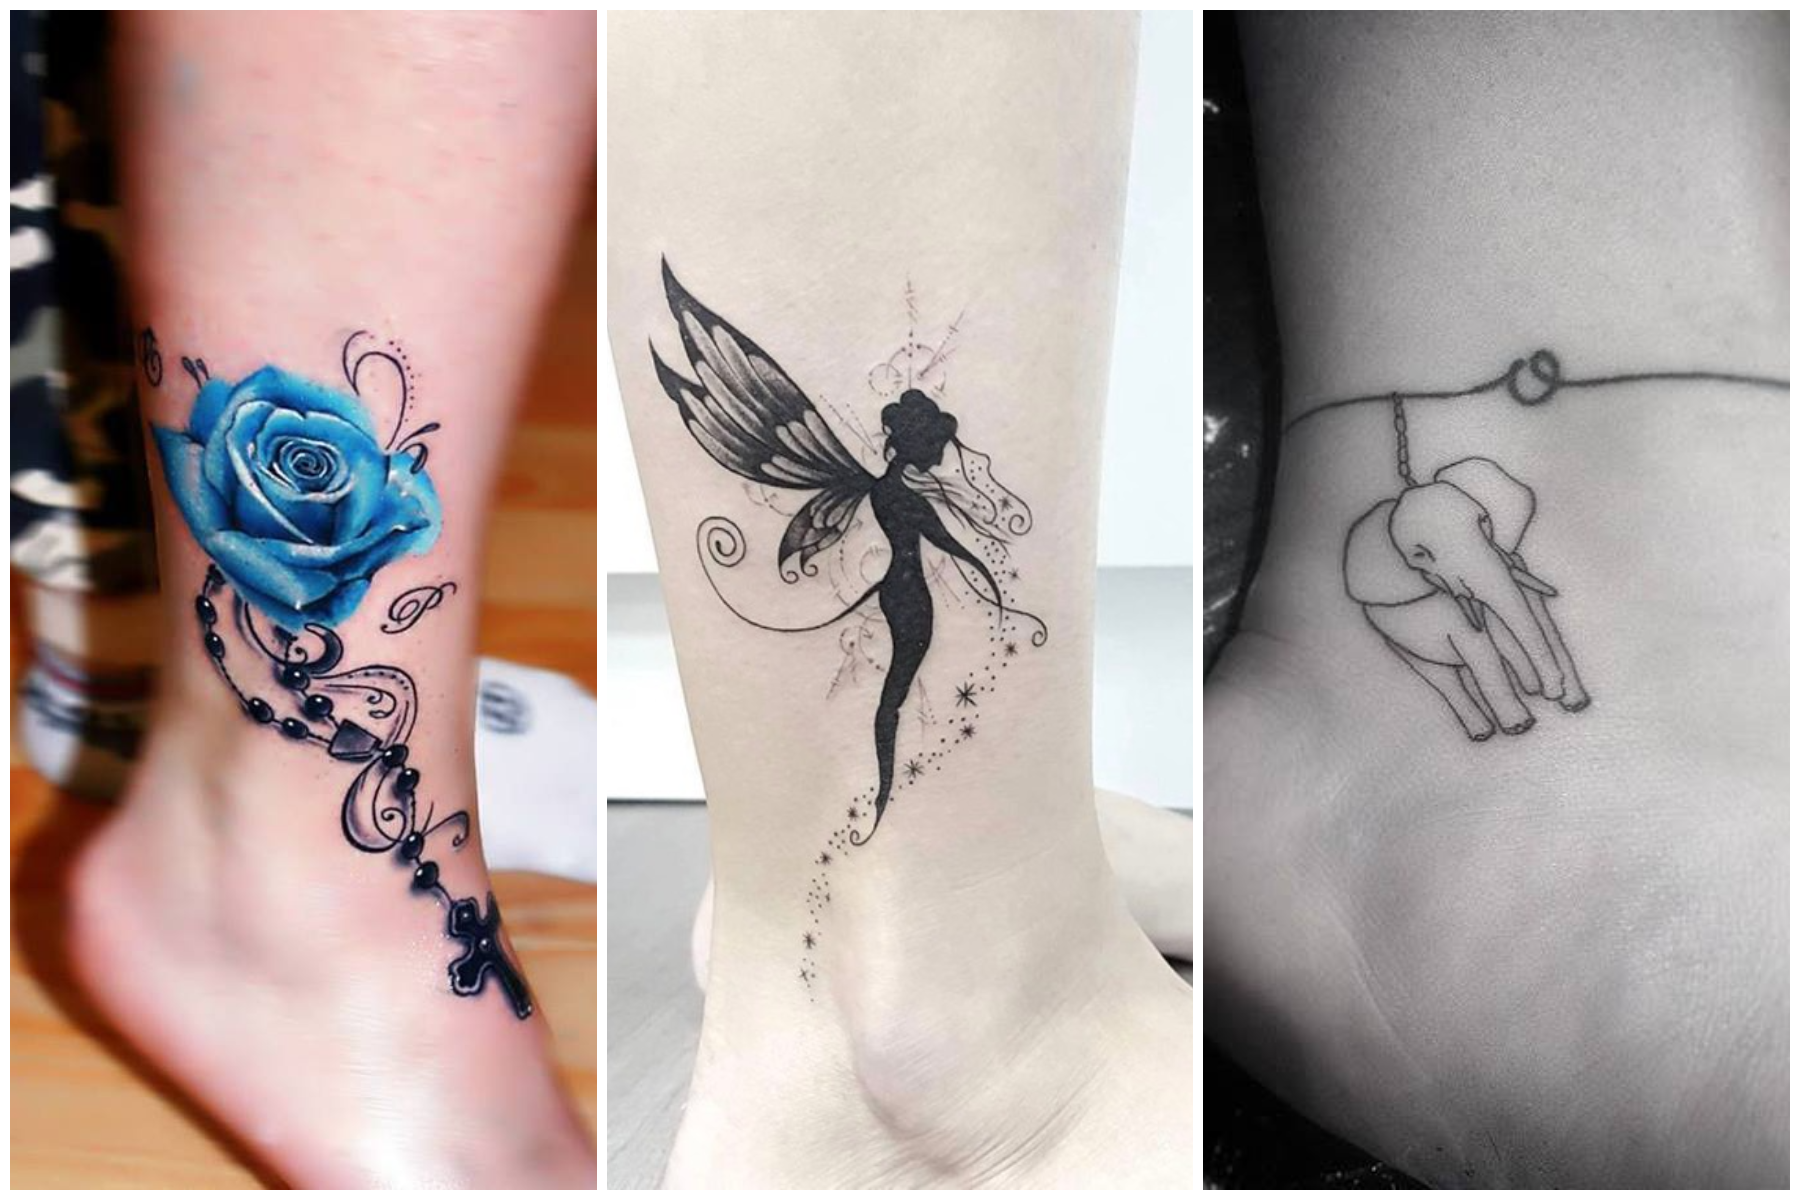 20 amazing ankle tattoos for men and women that will flaunt your walk